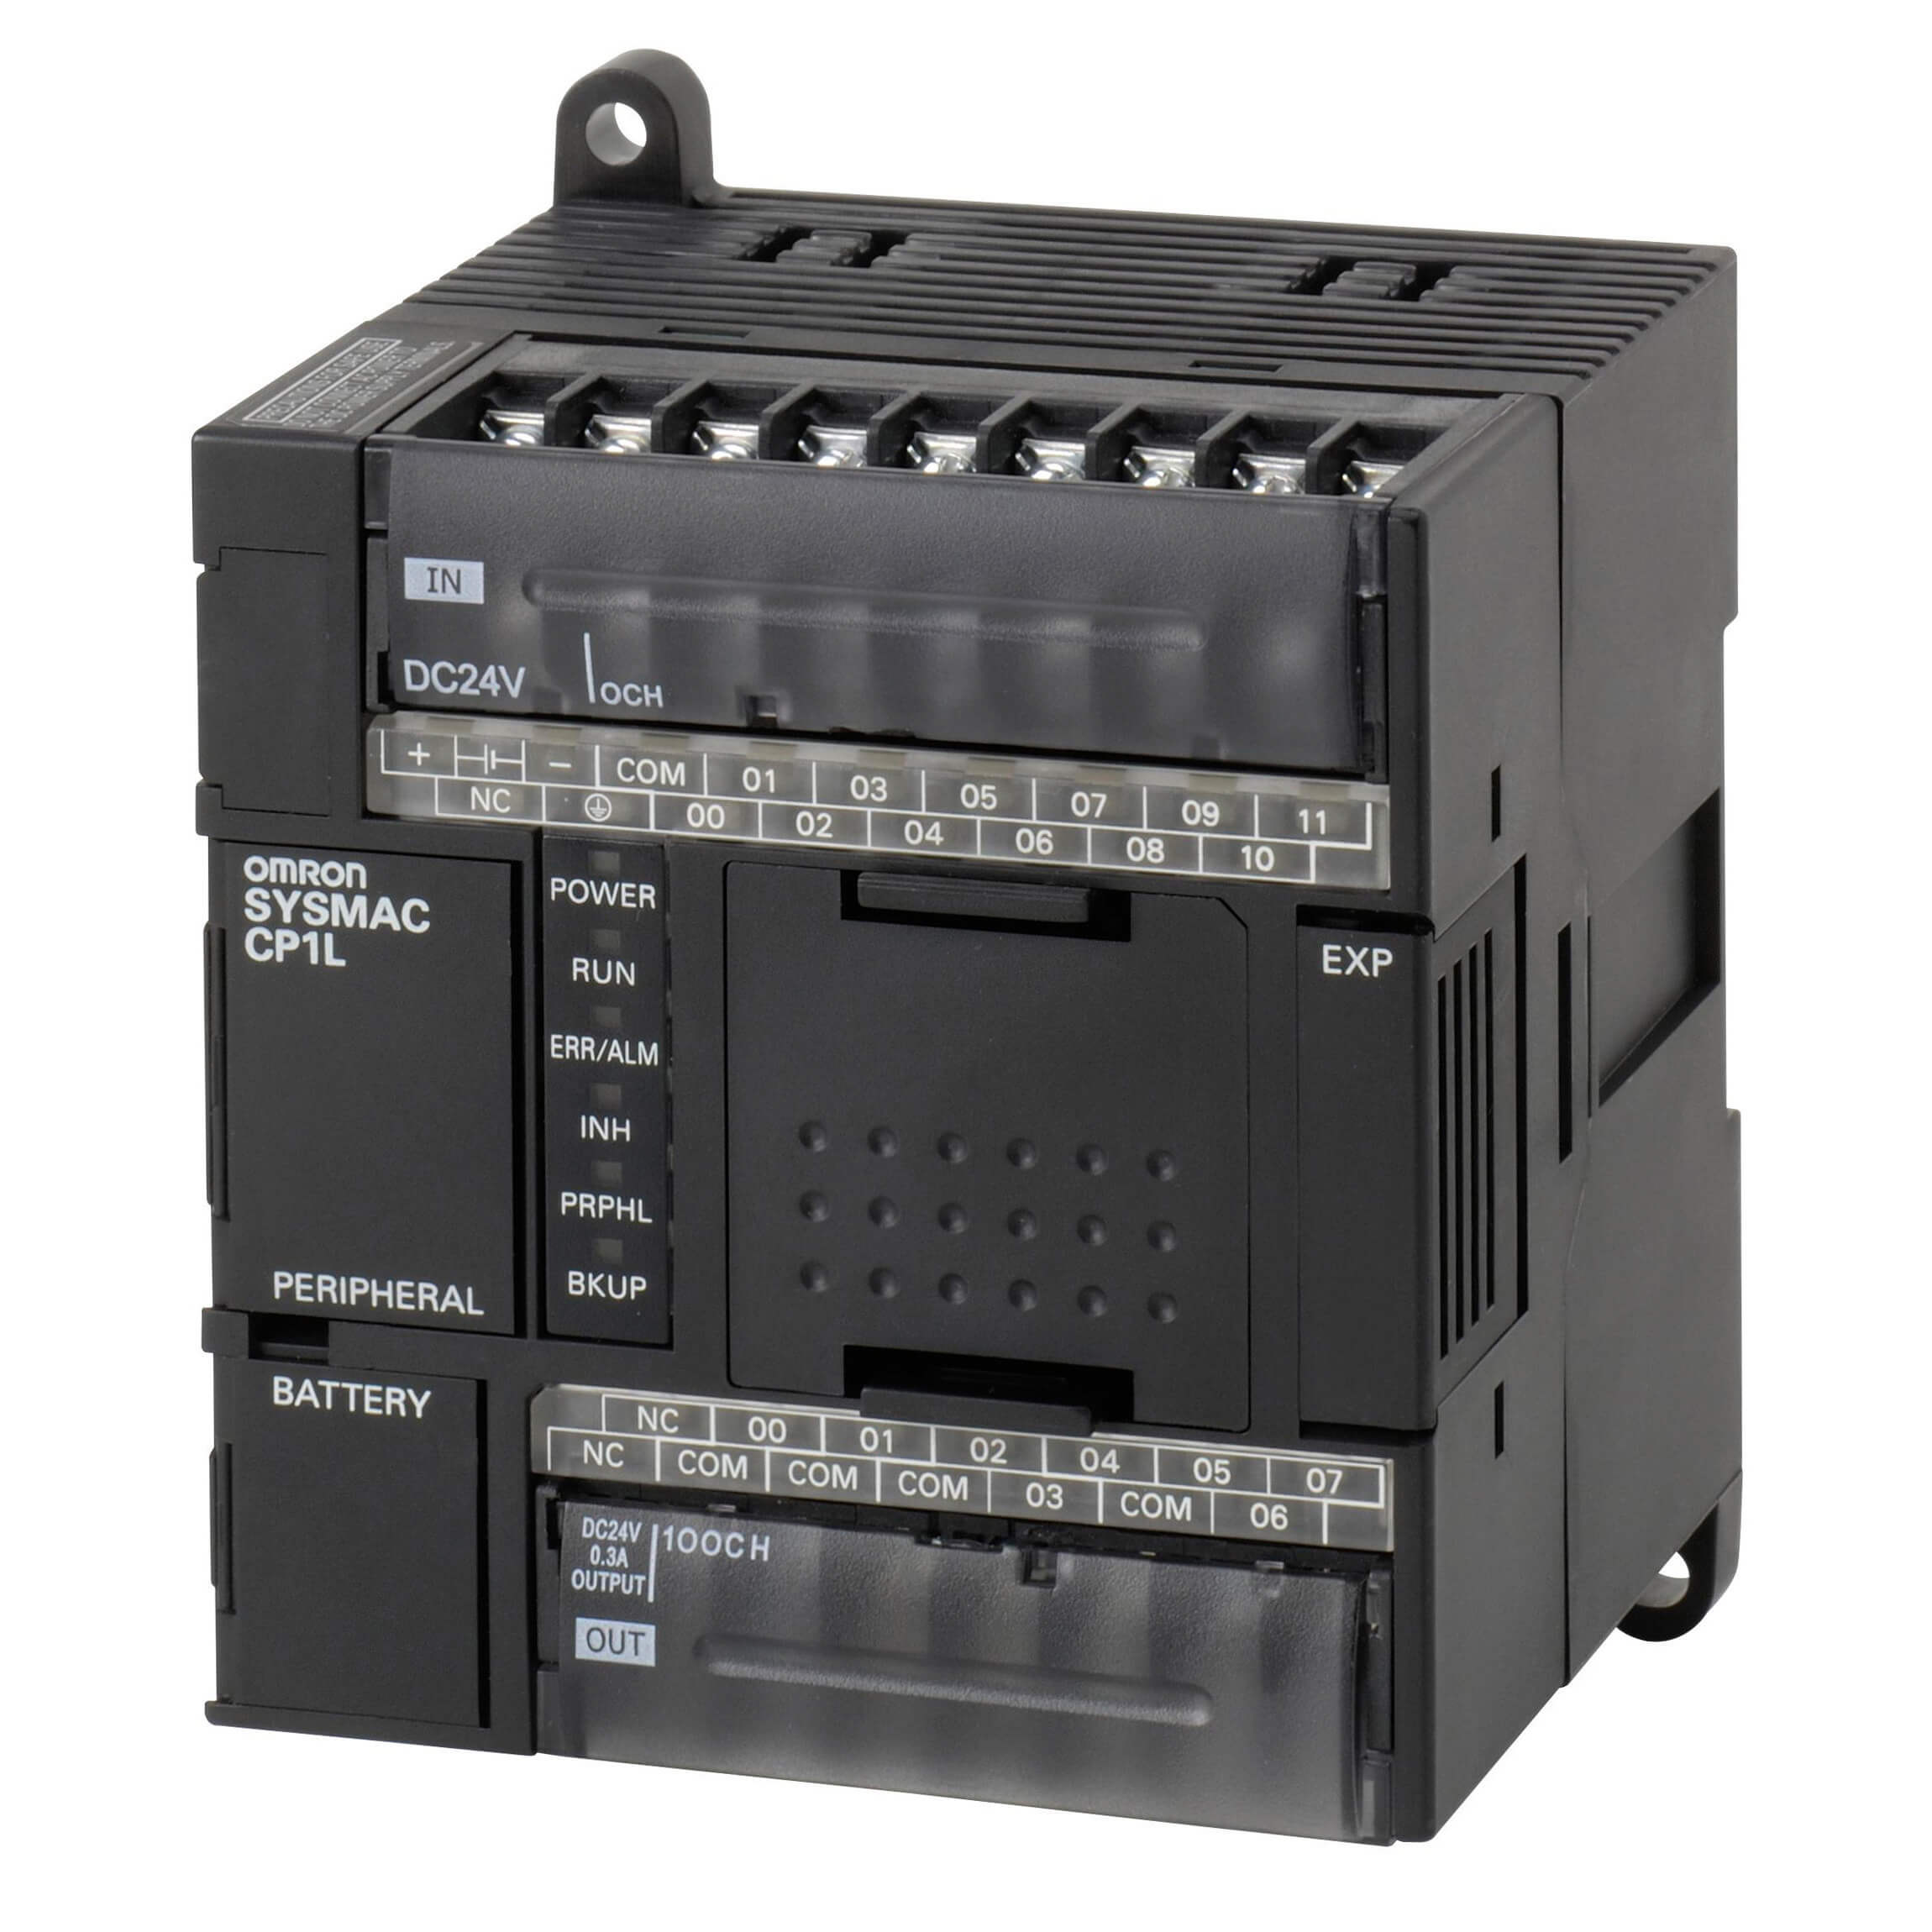 CP1L-L20DT-D | OMRON, Europe